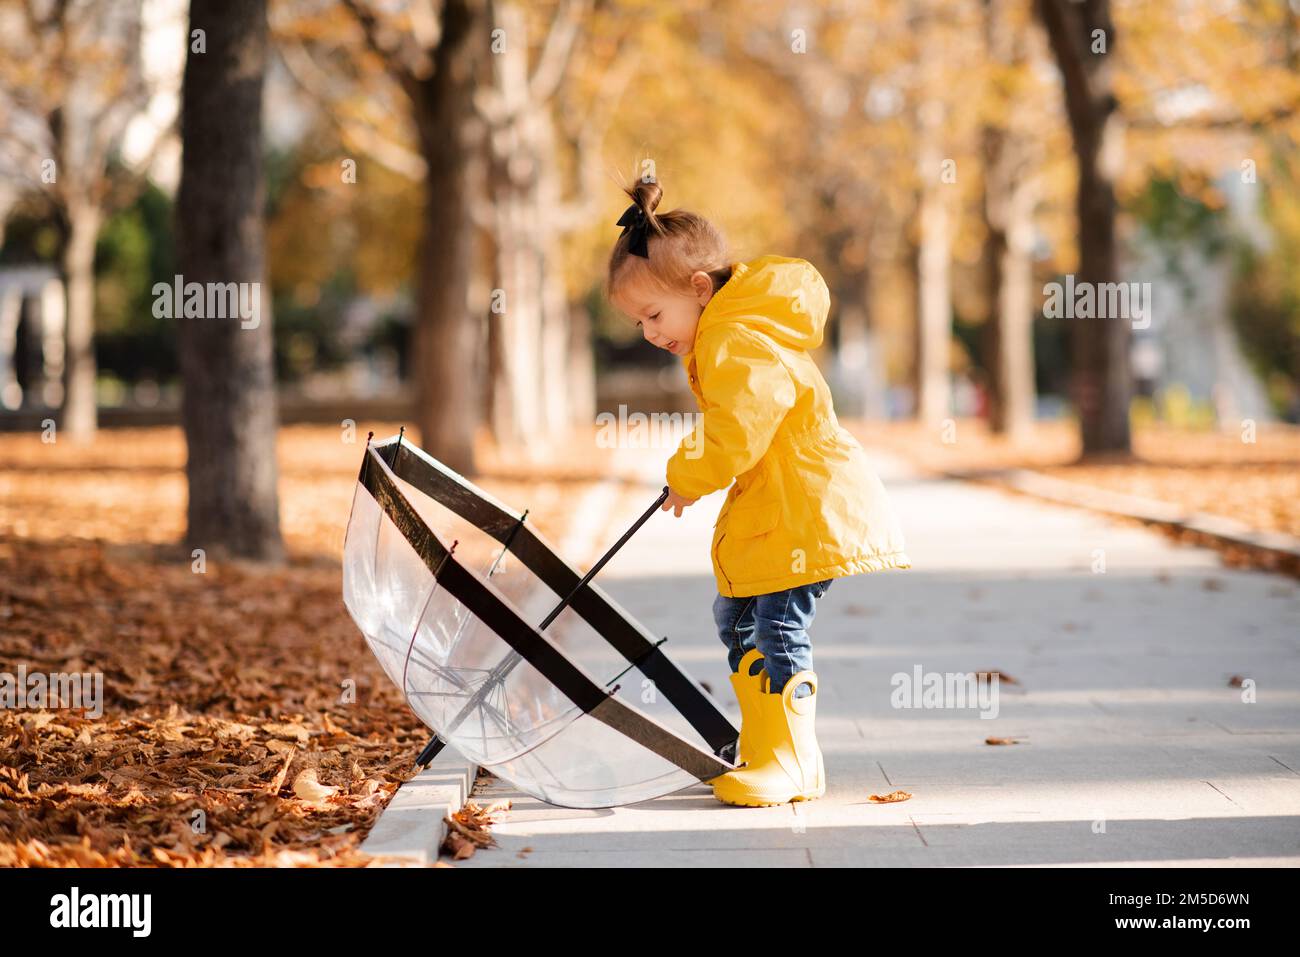 Cute funny kid girl 2-3 year old wear yellow rain jacket and boots hold umbrella in autumn park outdoor over fallen leaves. Fall season. Childhood. Stock Photo